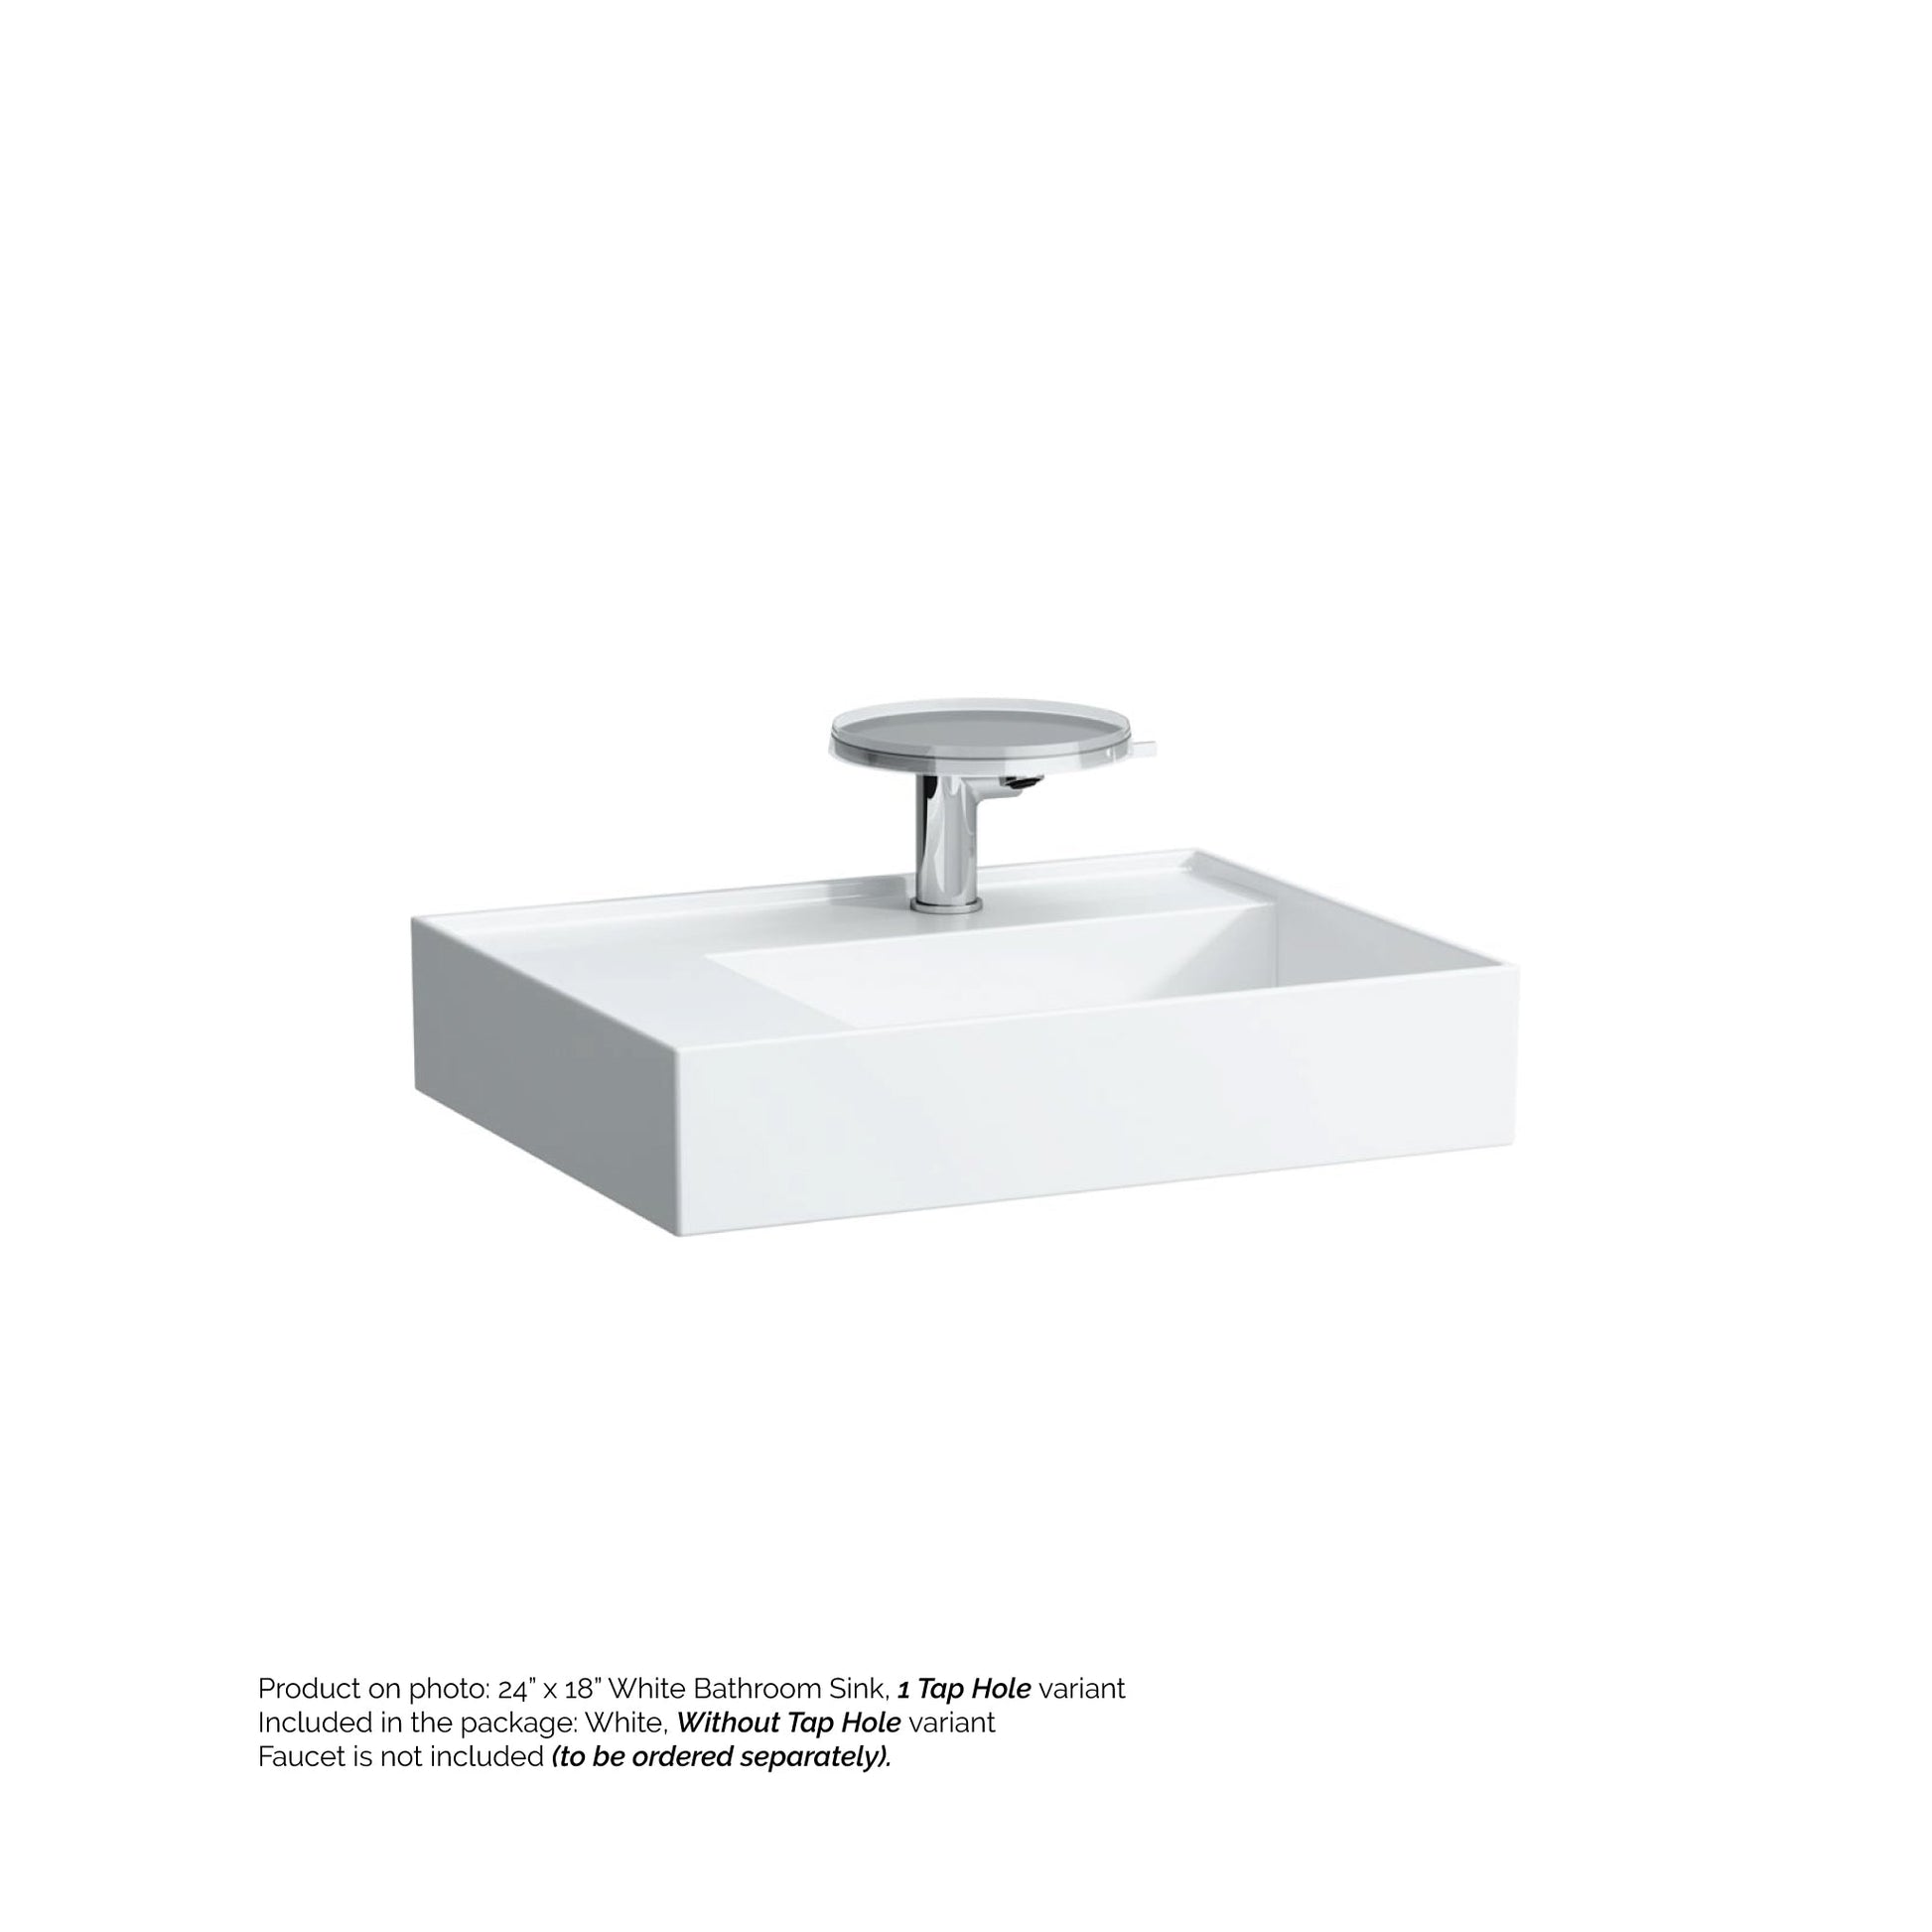 Laufen Kartell 24" x 18" White Wall-Mounted Shelf-Left Bathroom Sink Without Faucet Hole